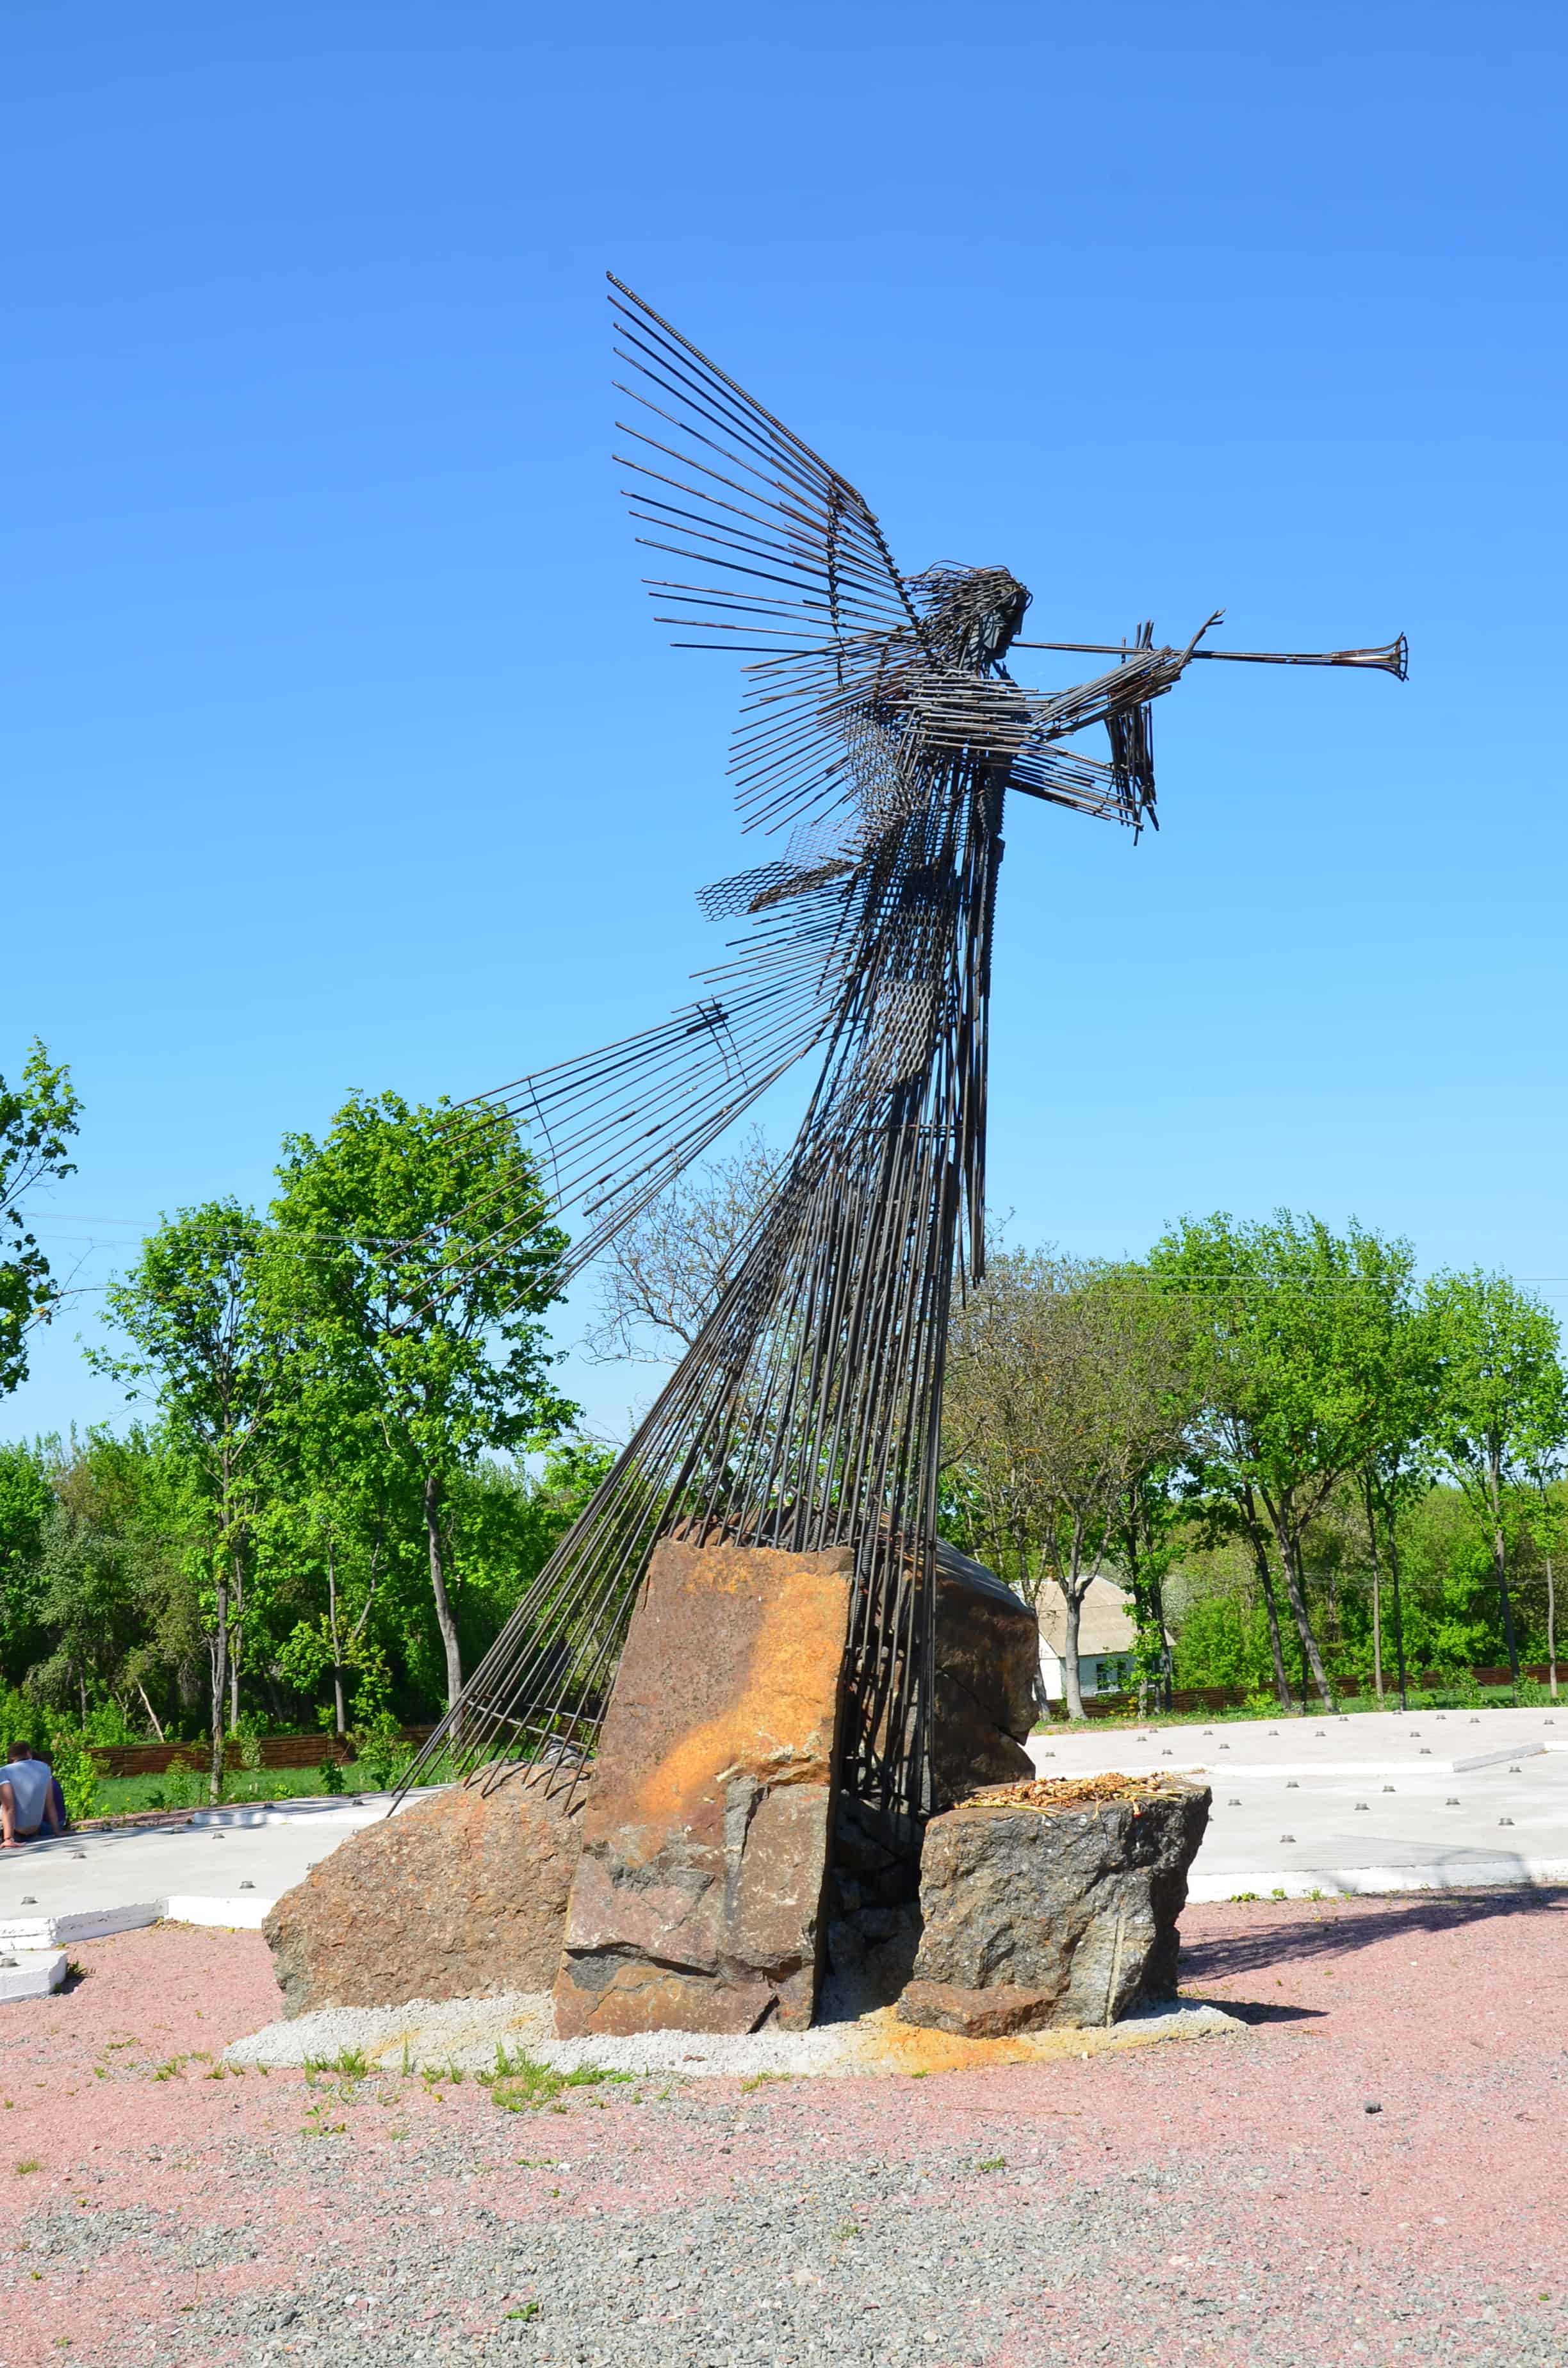 Trumpeting angel at the Wormwood Star Memorial in Chernobyl, Chernobyl Exclusion Zone, Ukraine